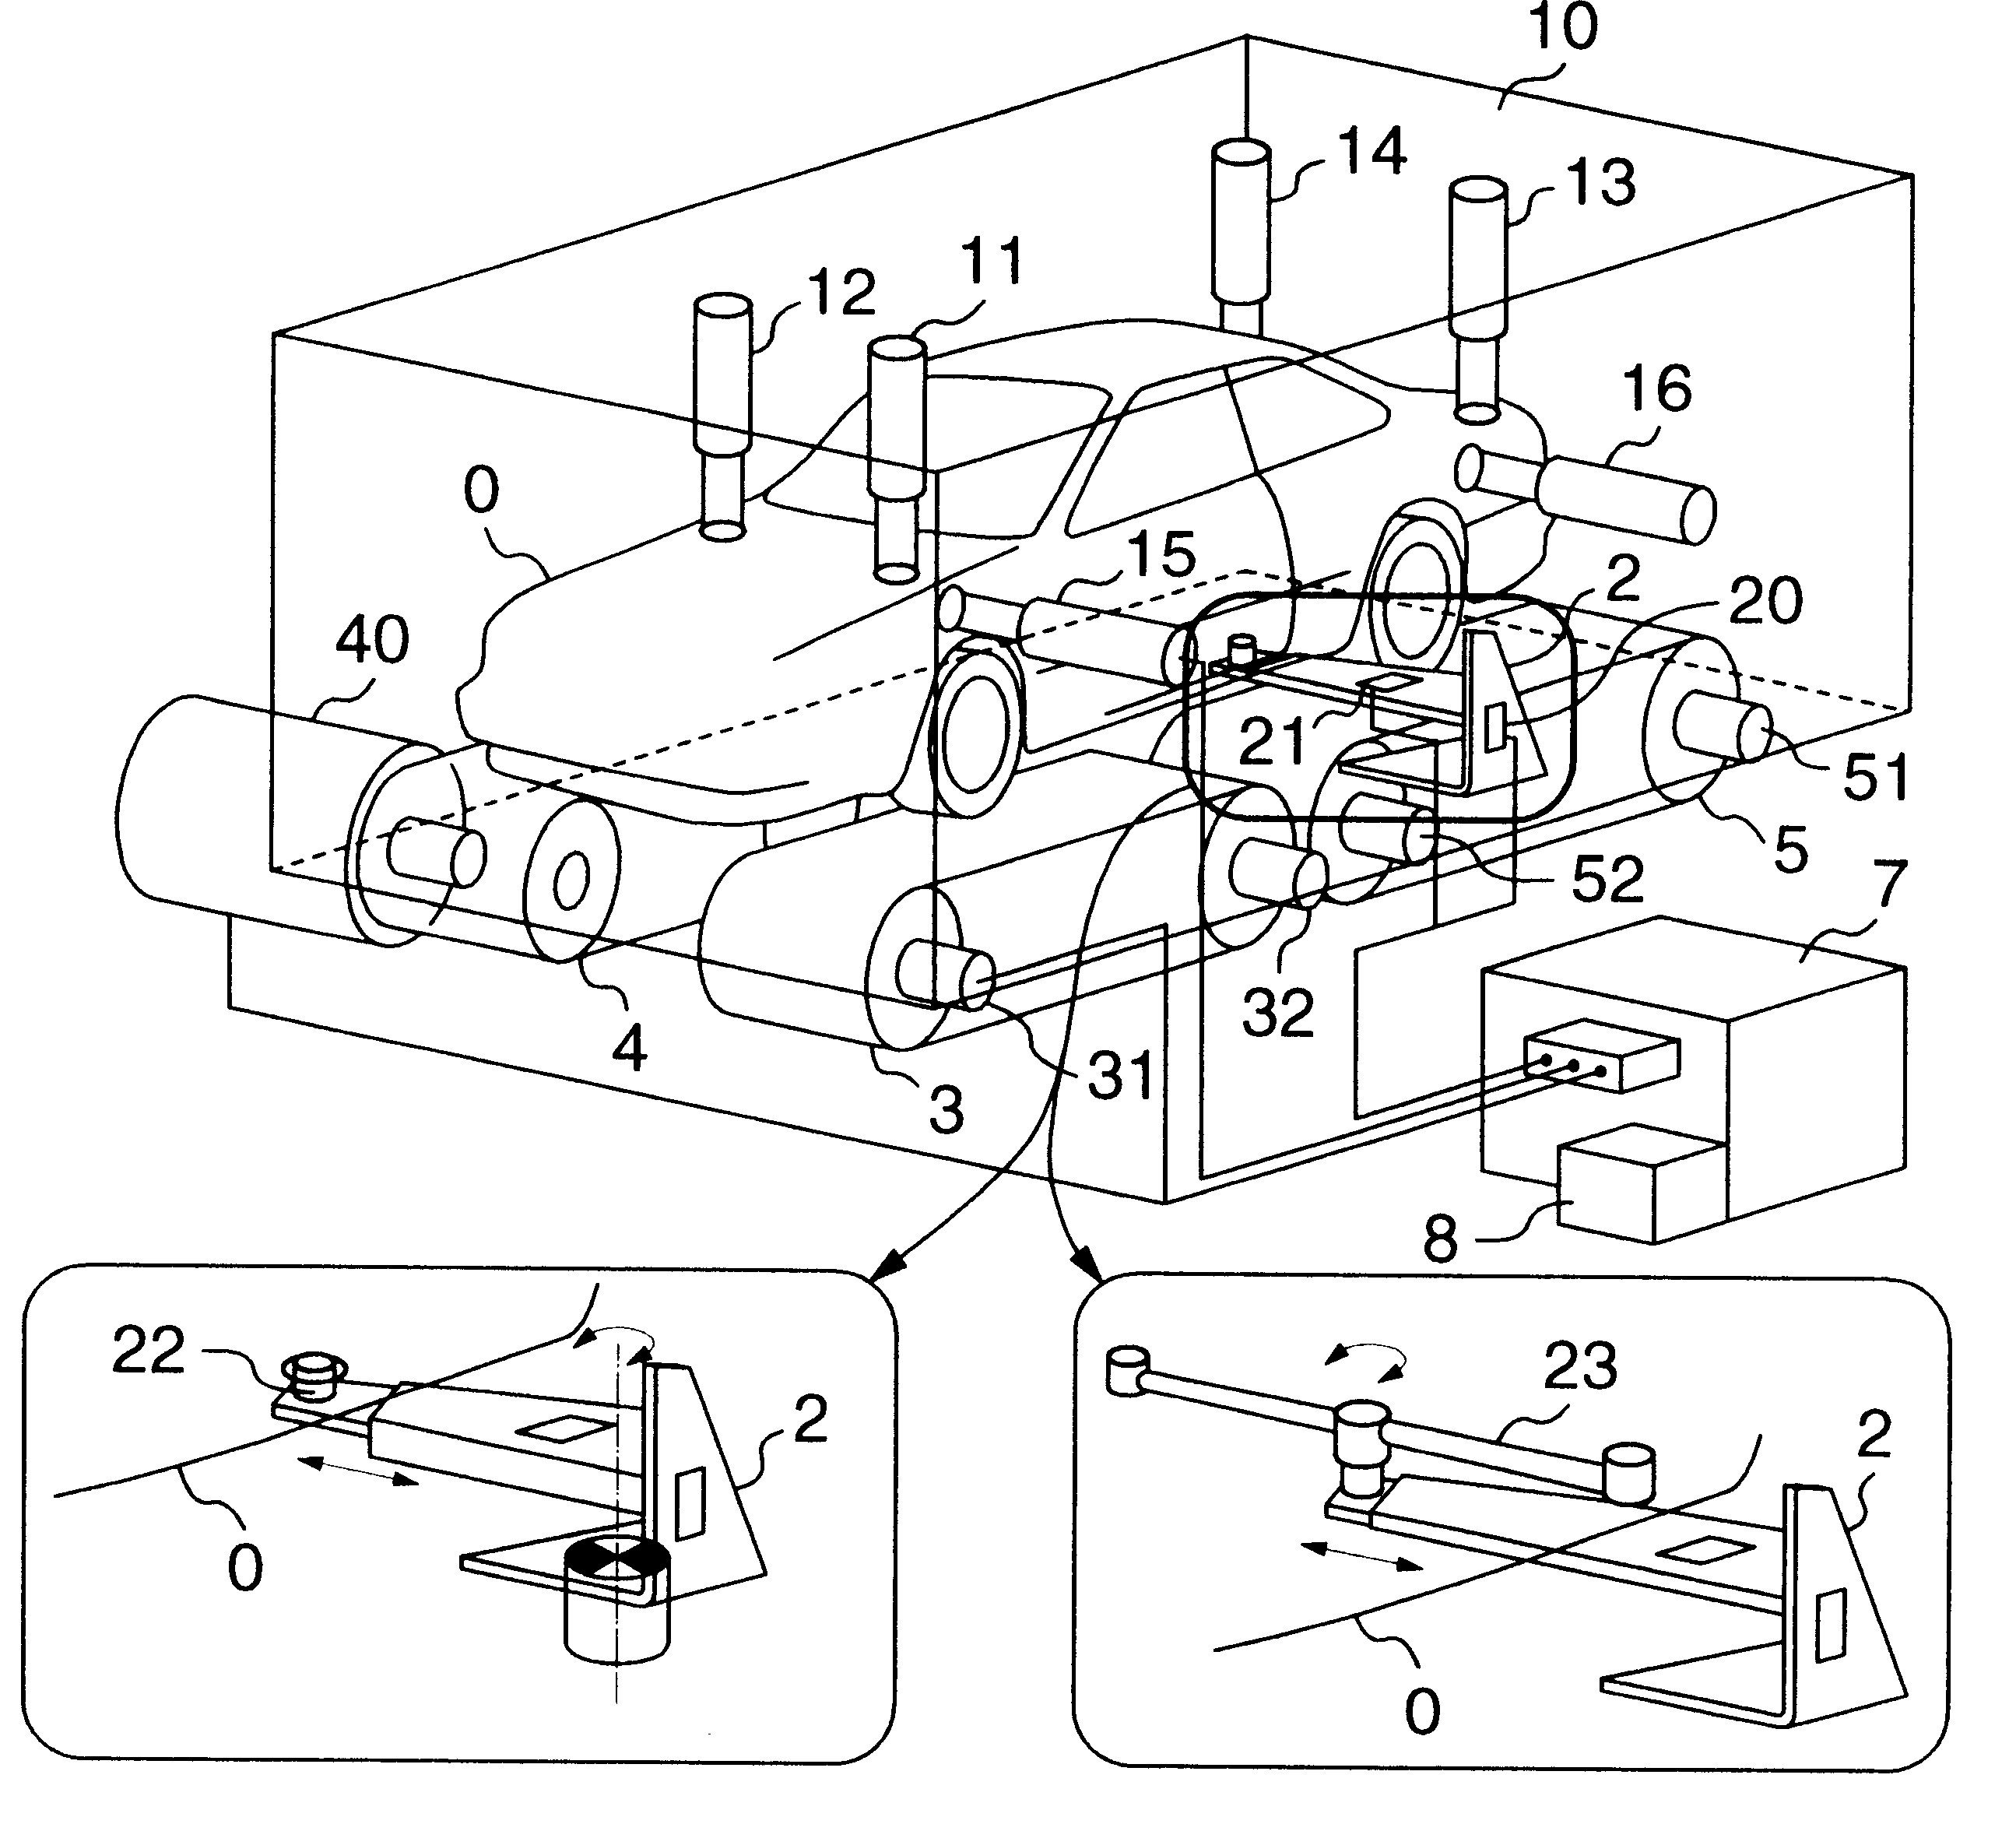 Apparatus for the method of testing vehicle